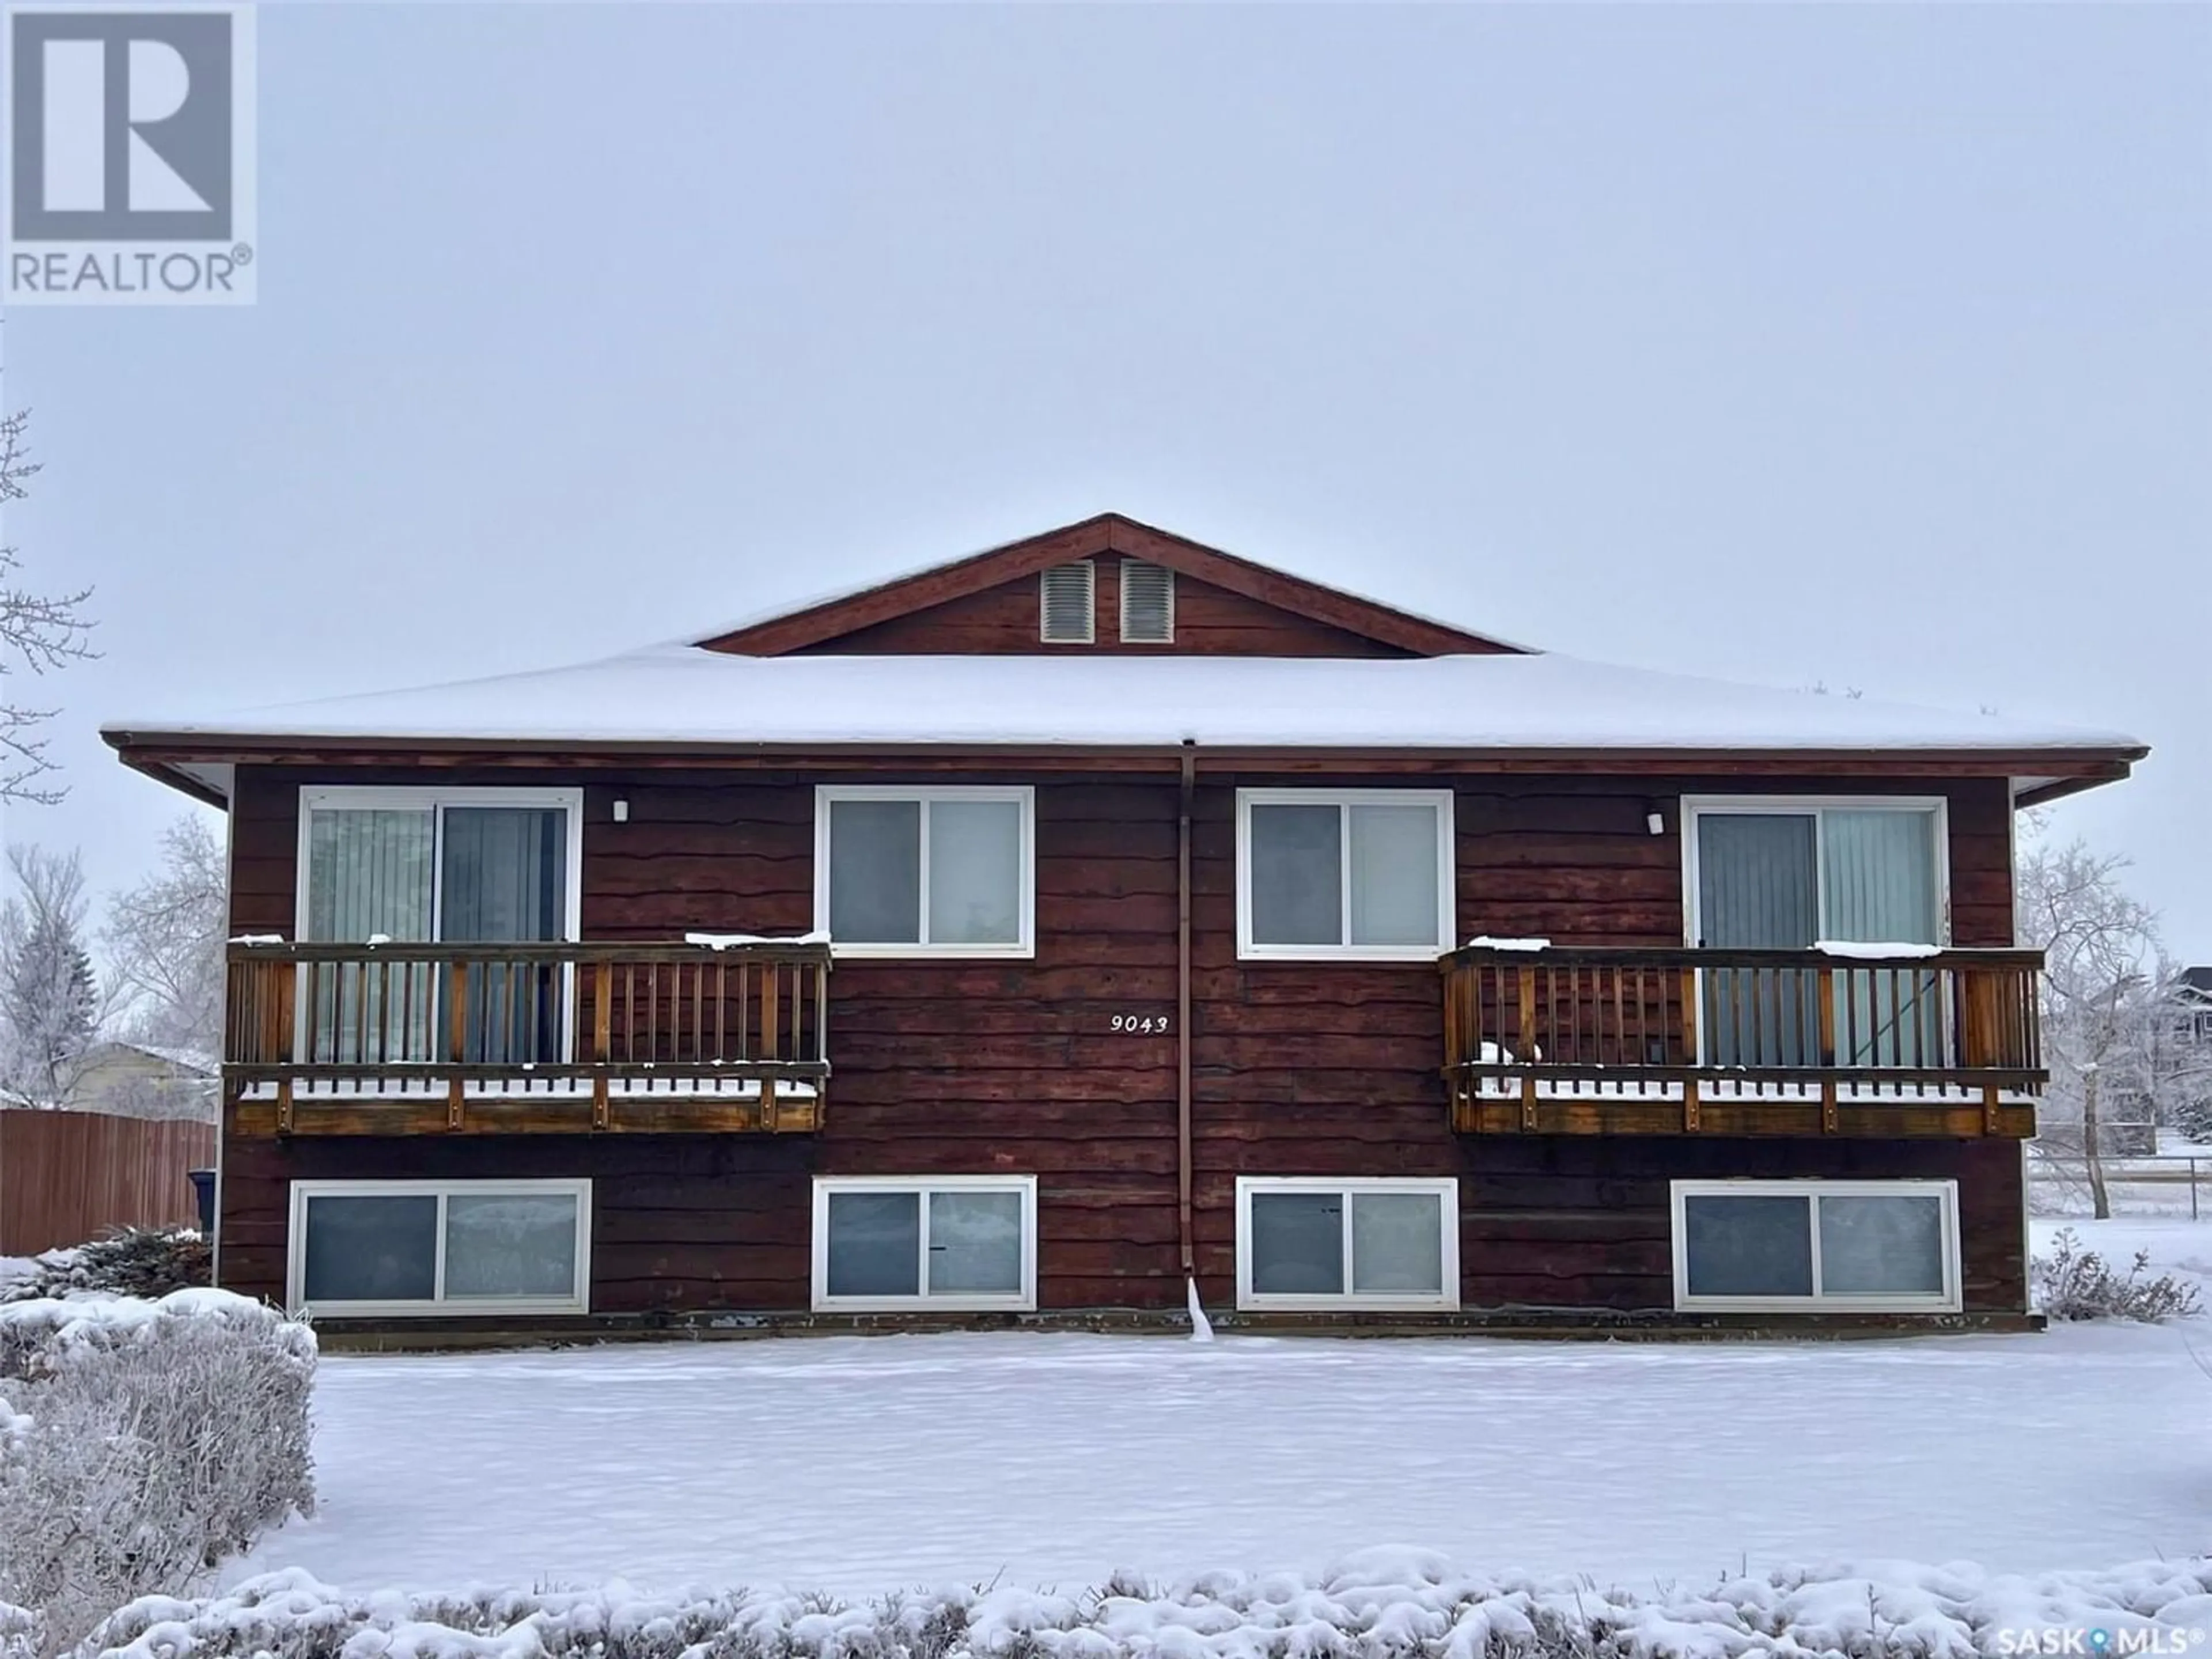 A pic from exterior of the house or condo for 9043 Panton AVENUE, North Battleford Saskatchewan S9A3J8